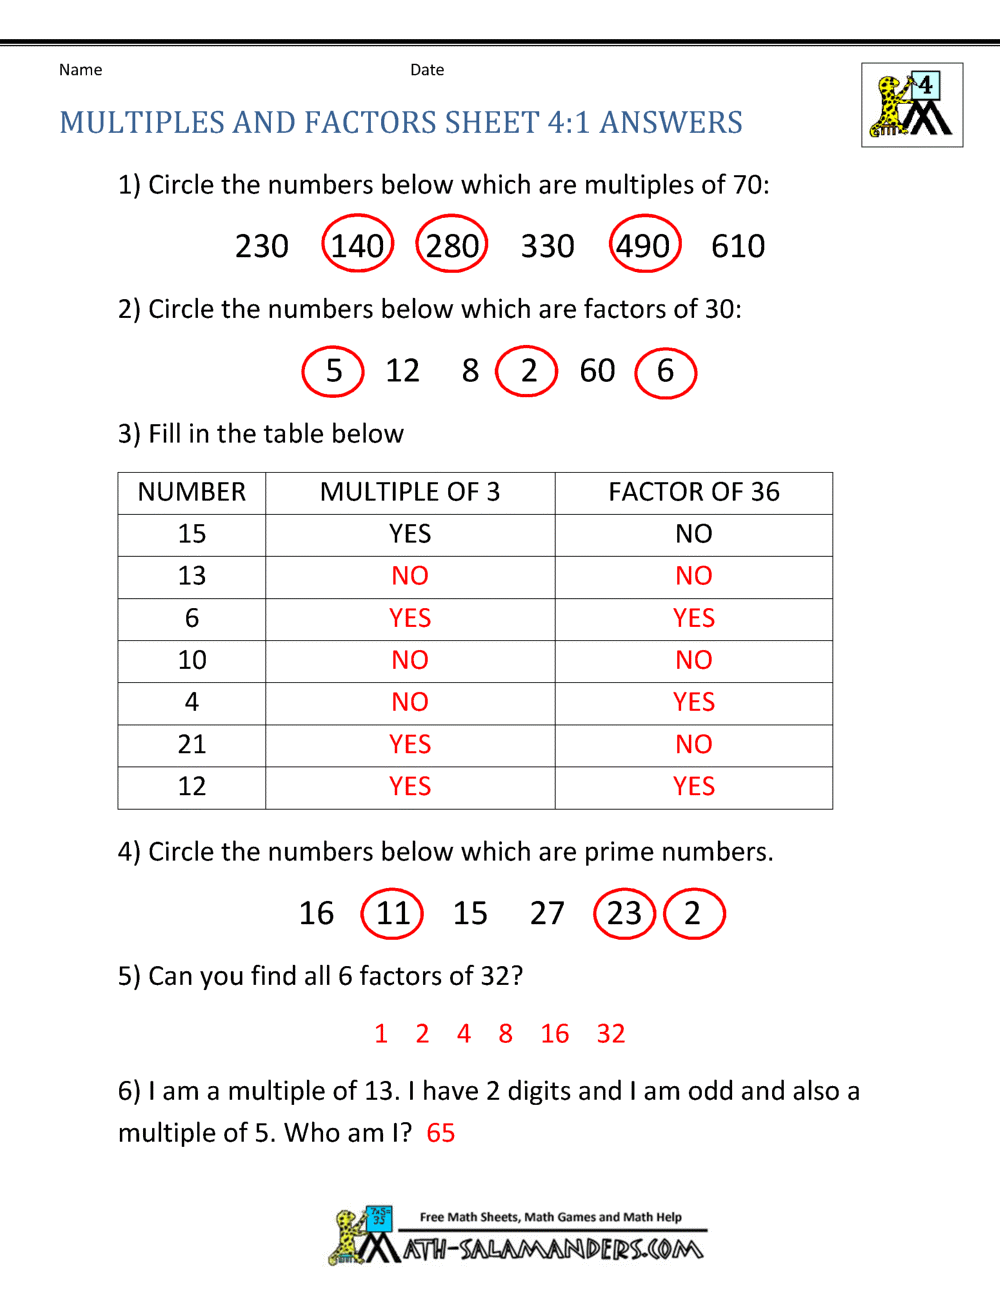 Factors Of Production Worksheet Answers